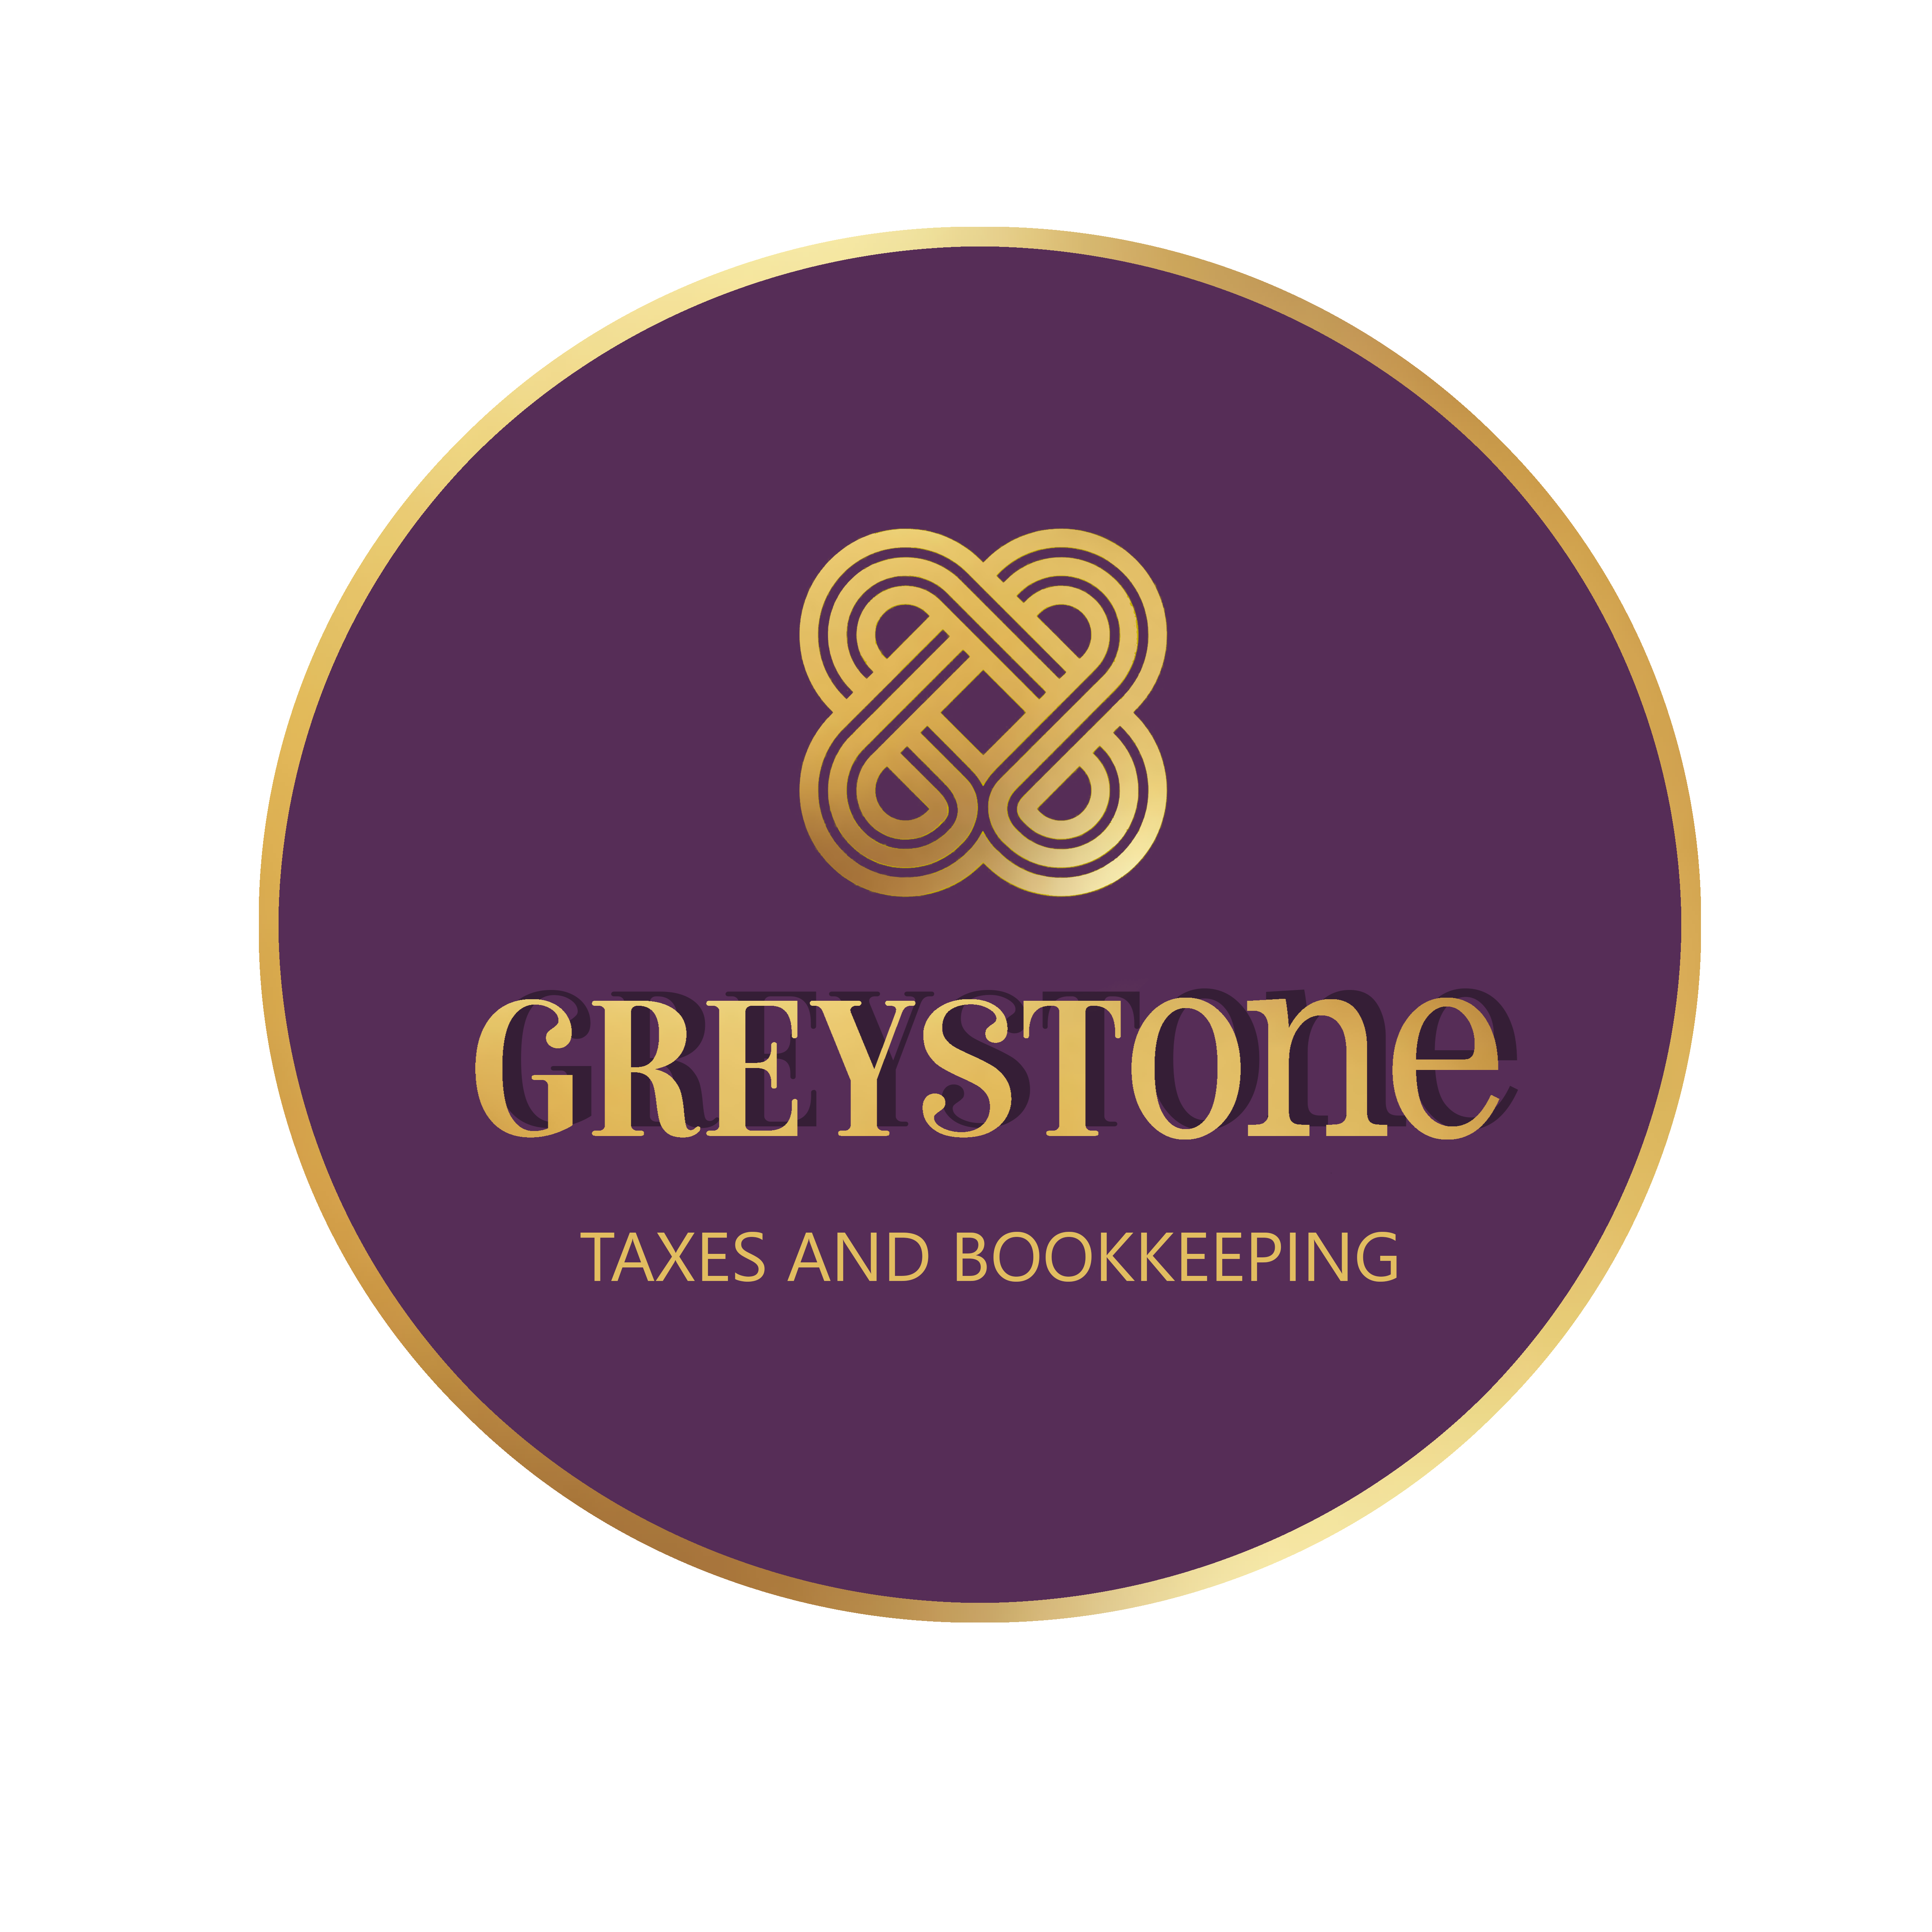 Greystone Taxes and Bookkeeping